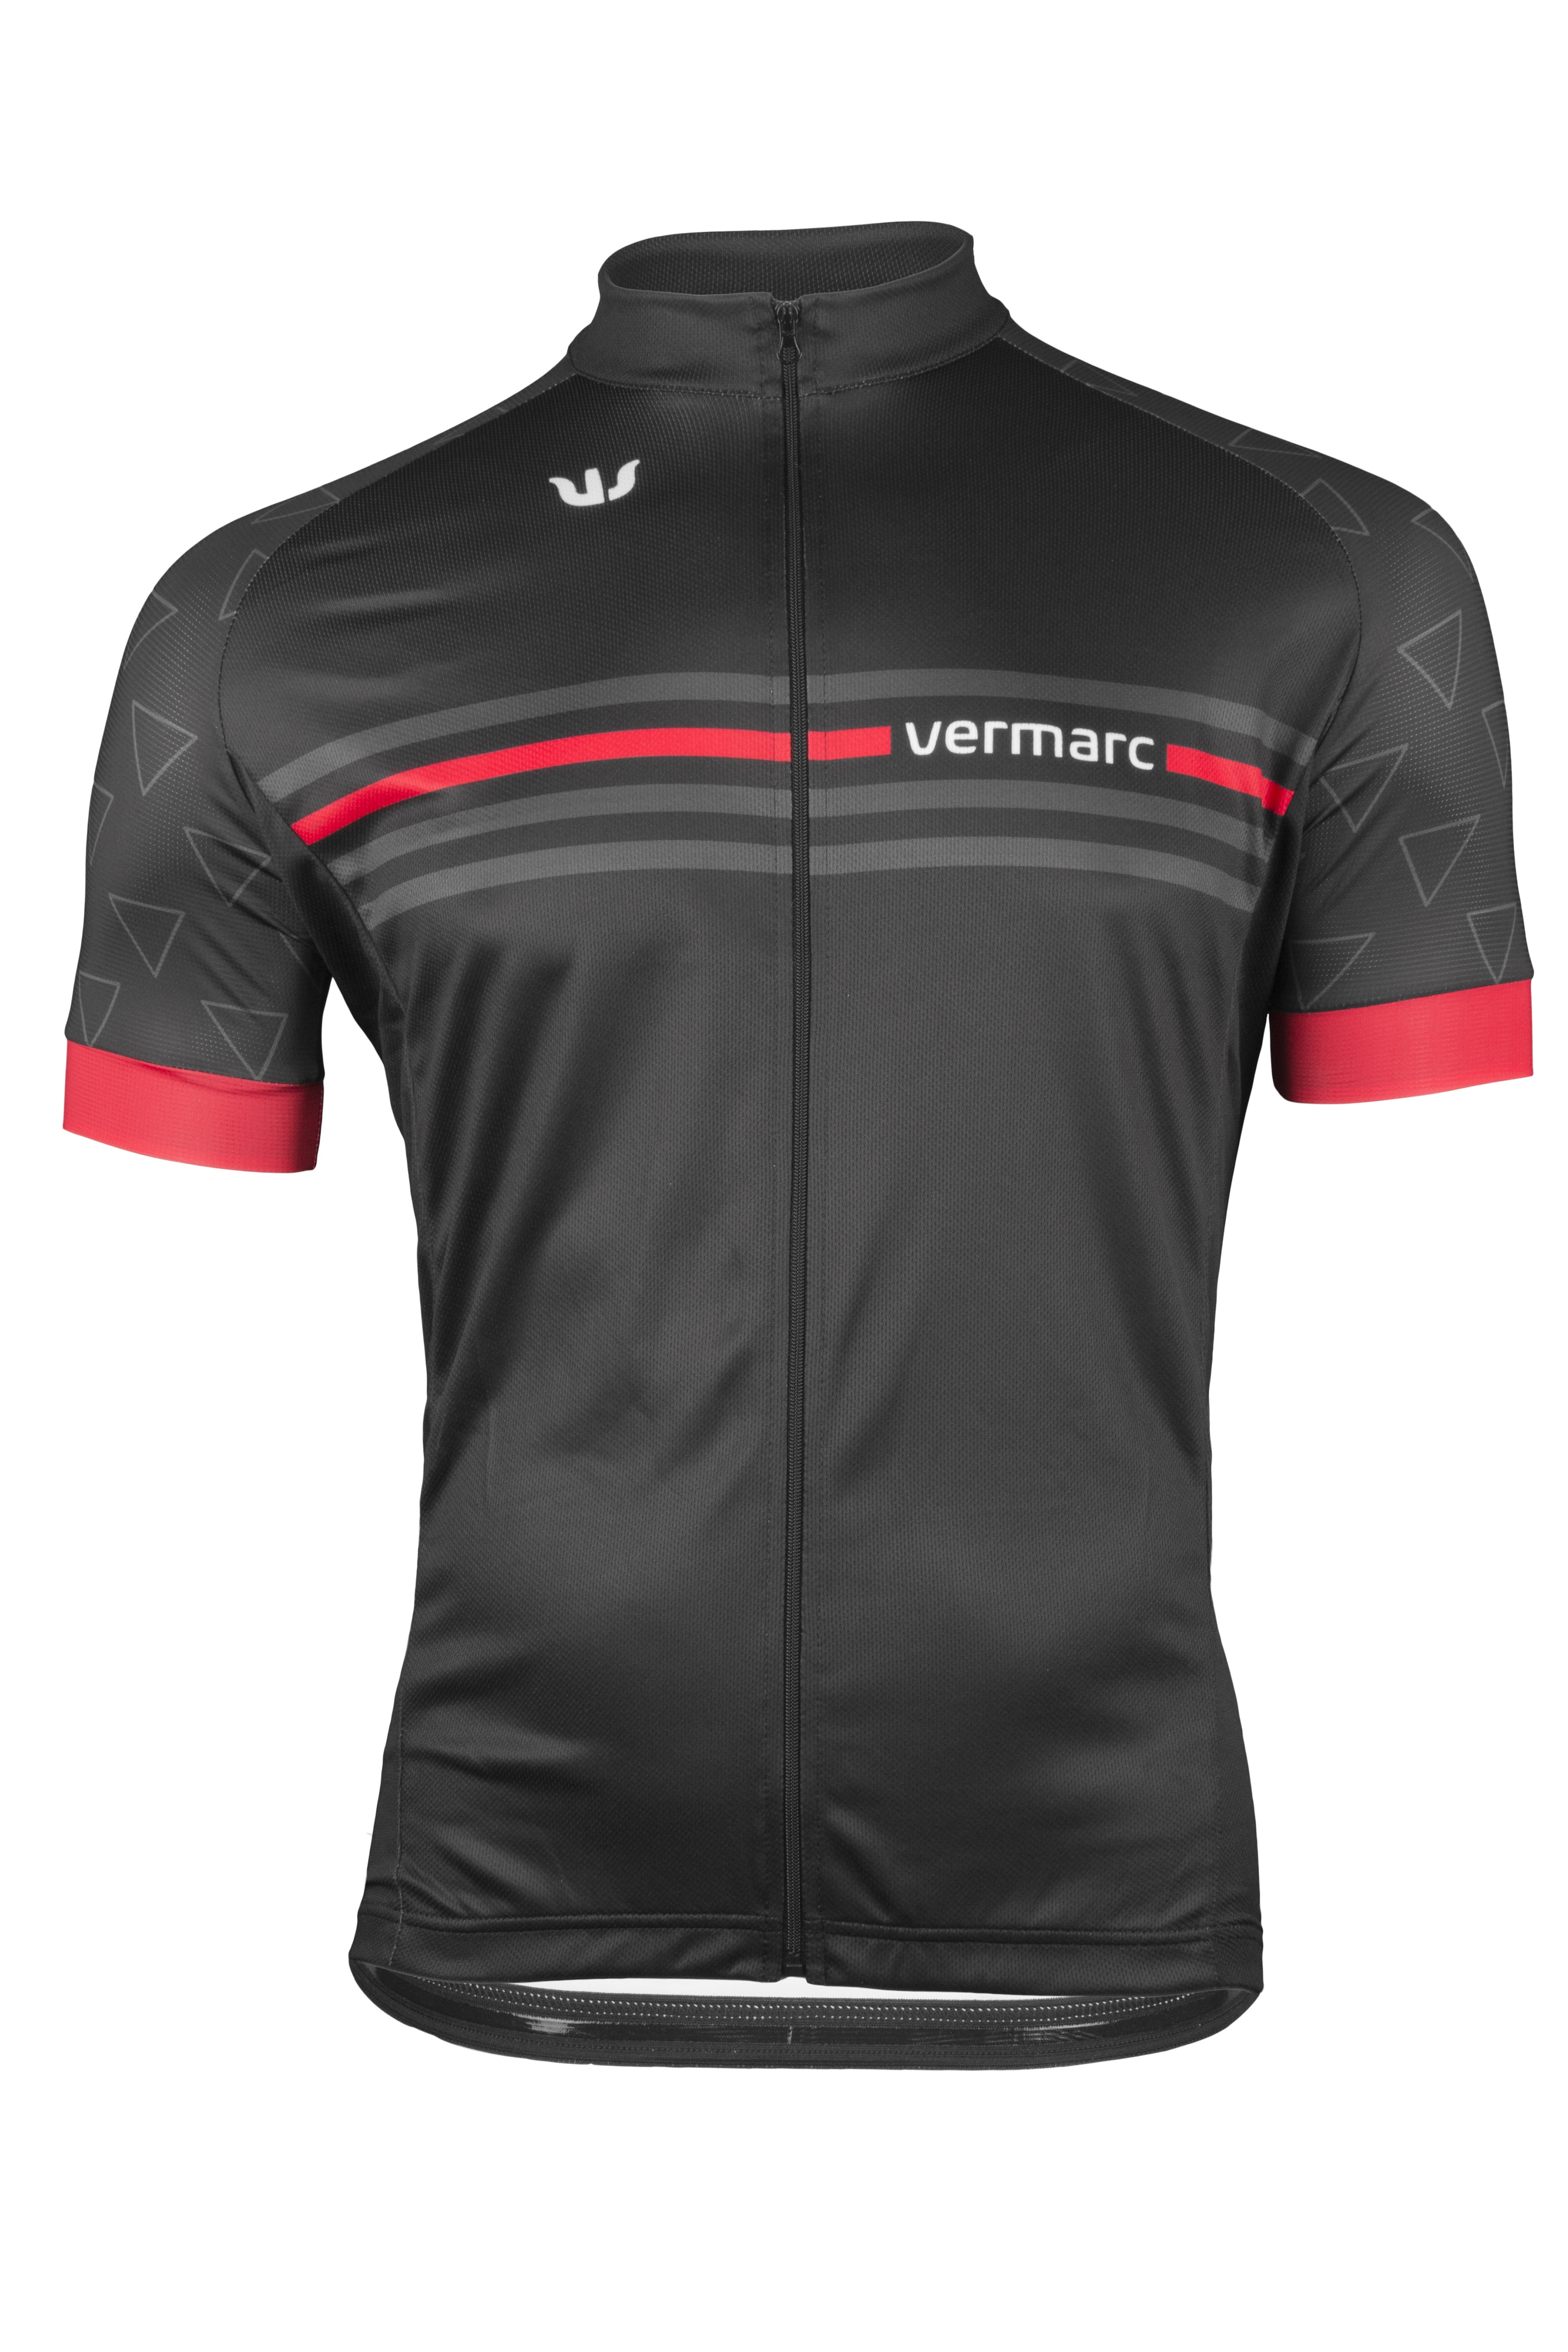 VERMARC Attaco Jersey SS Black Red